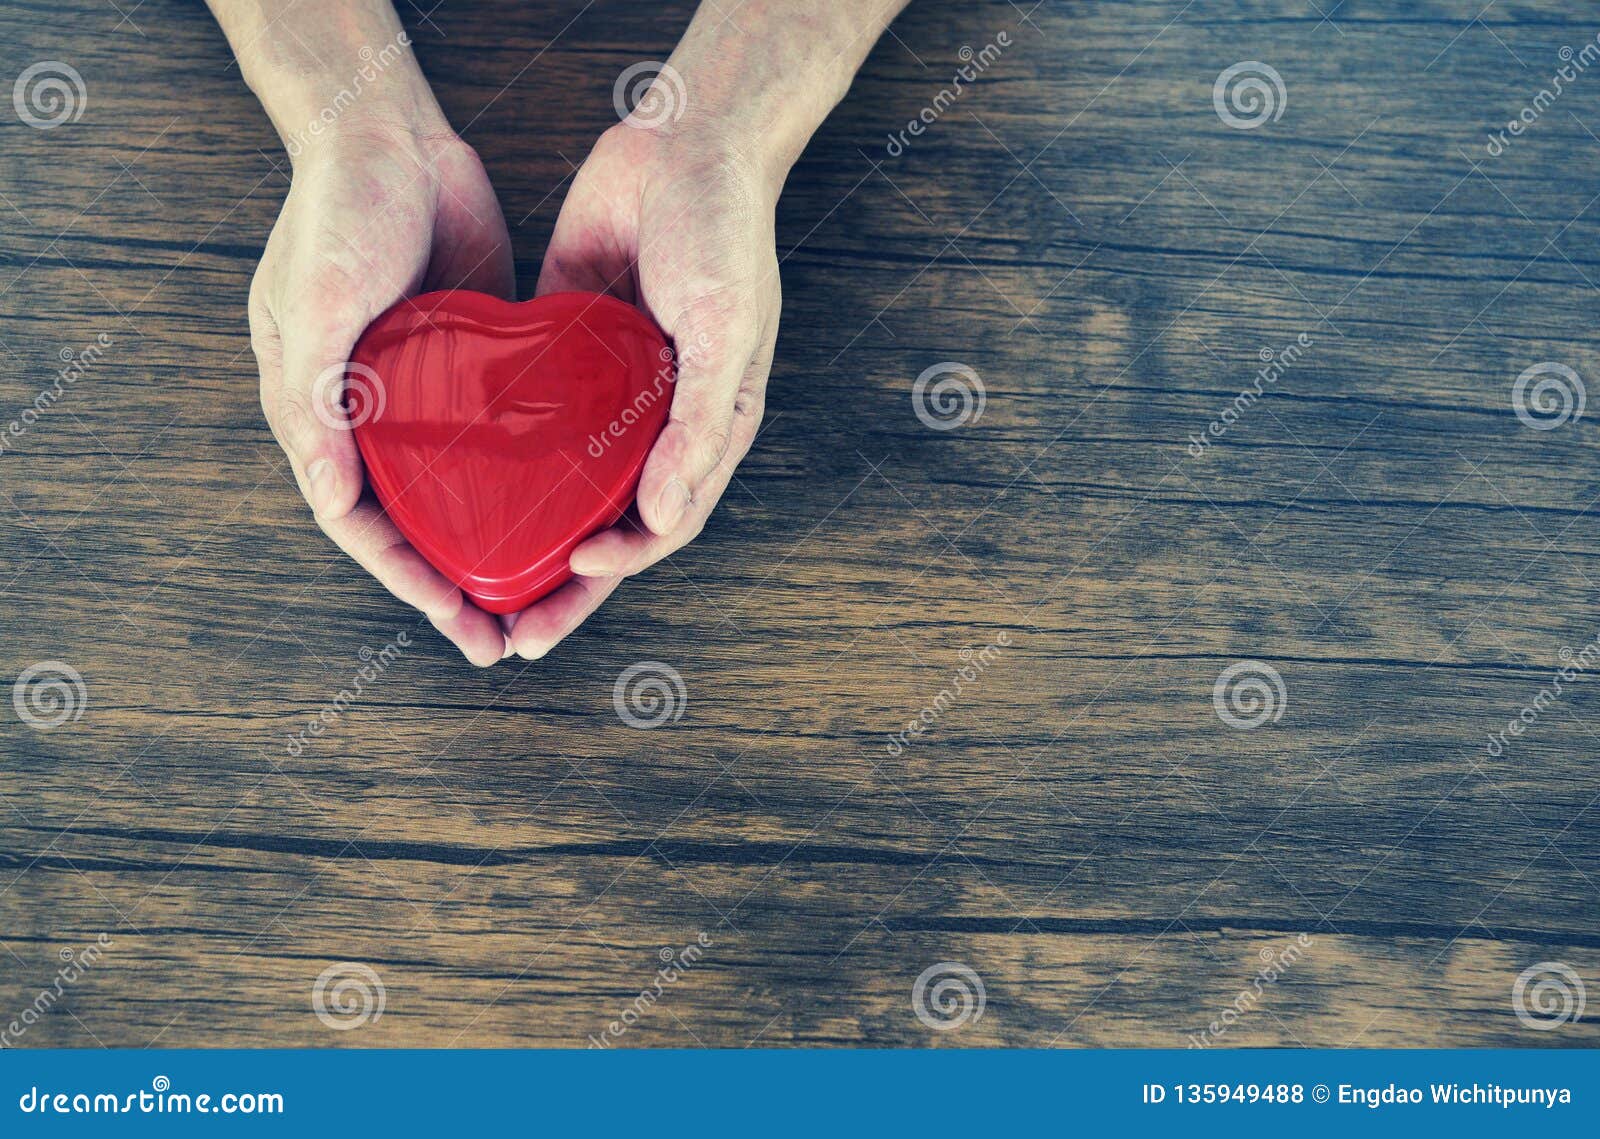 give love man holding red heart in hands for love valentines day donate help give love warmth take care concept